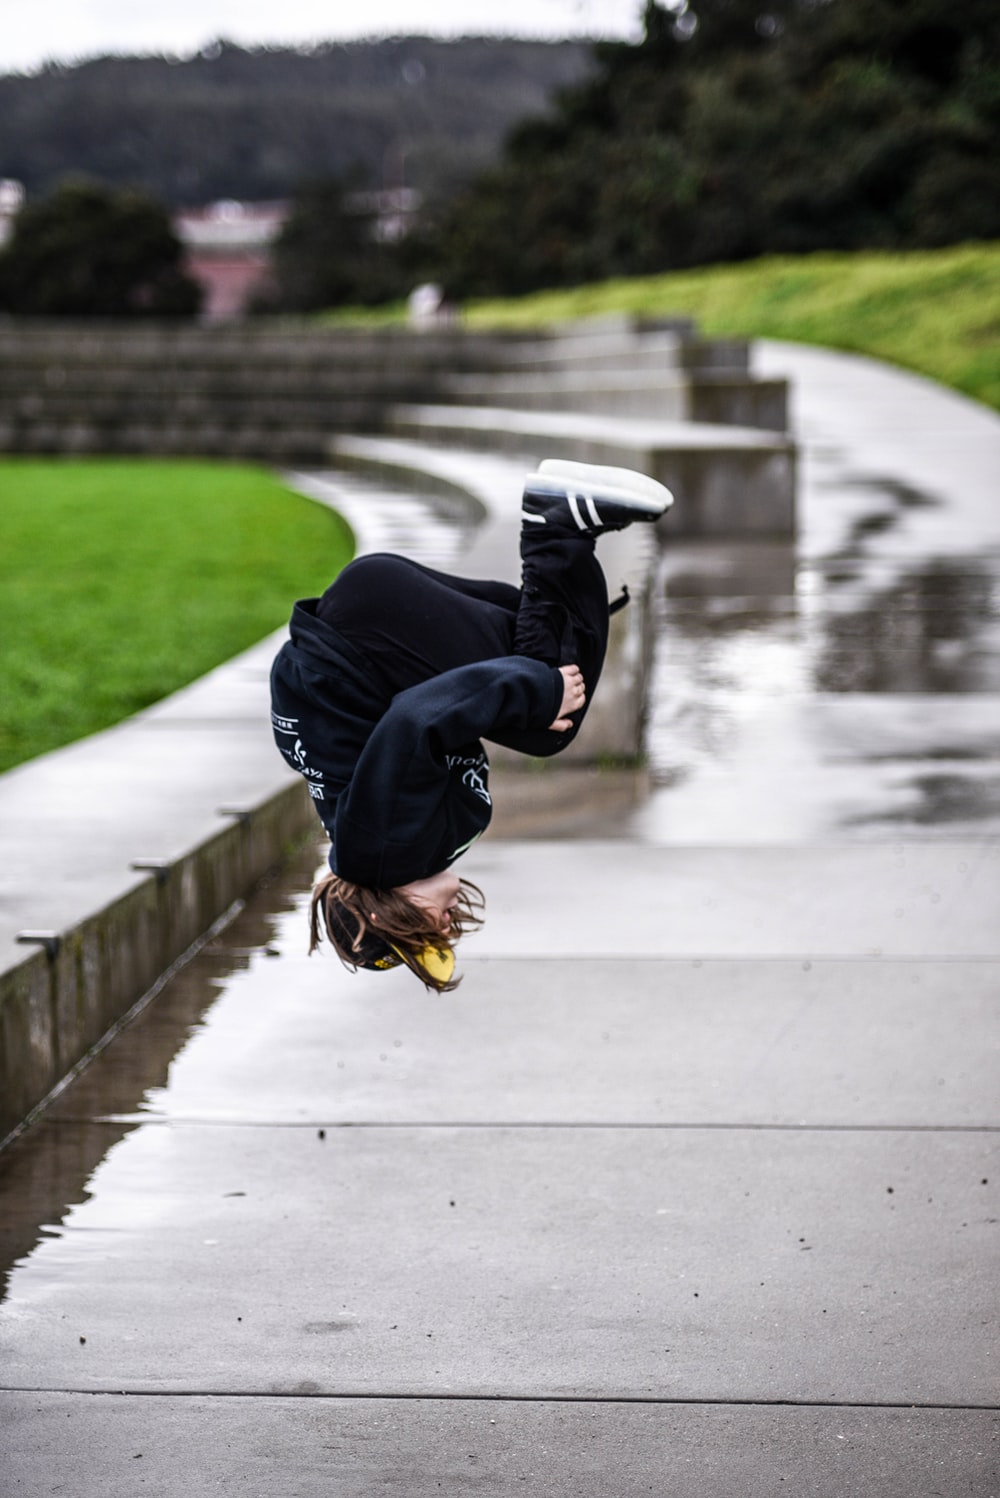 Backflip Picture [HD]. Download Free Image